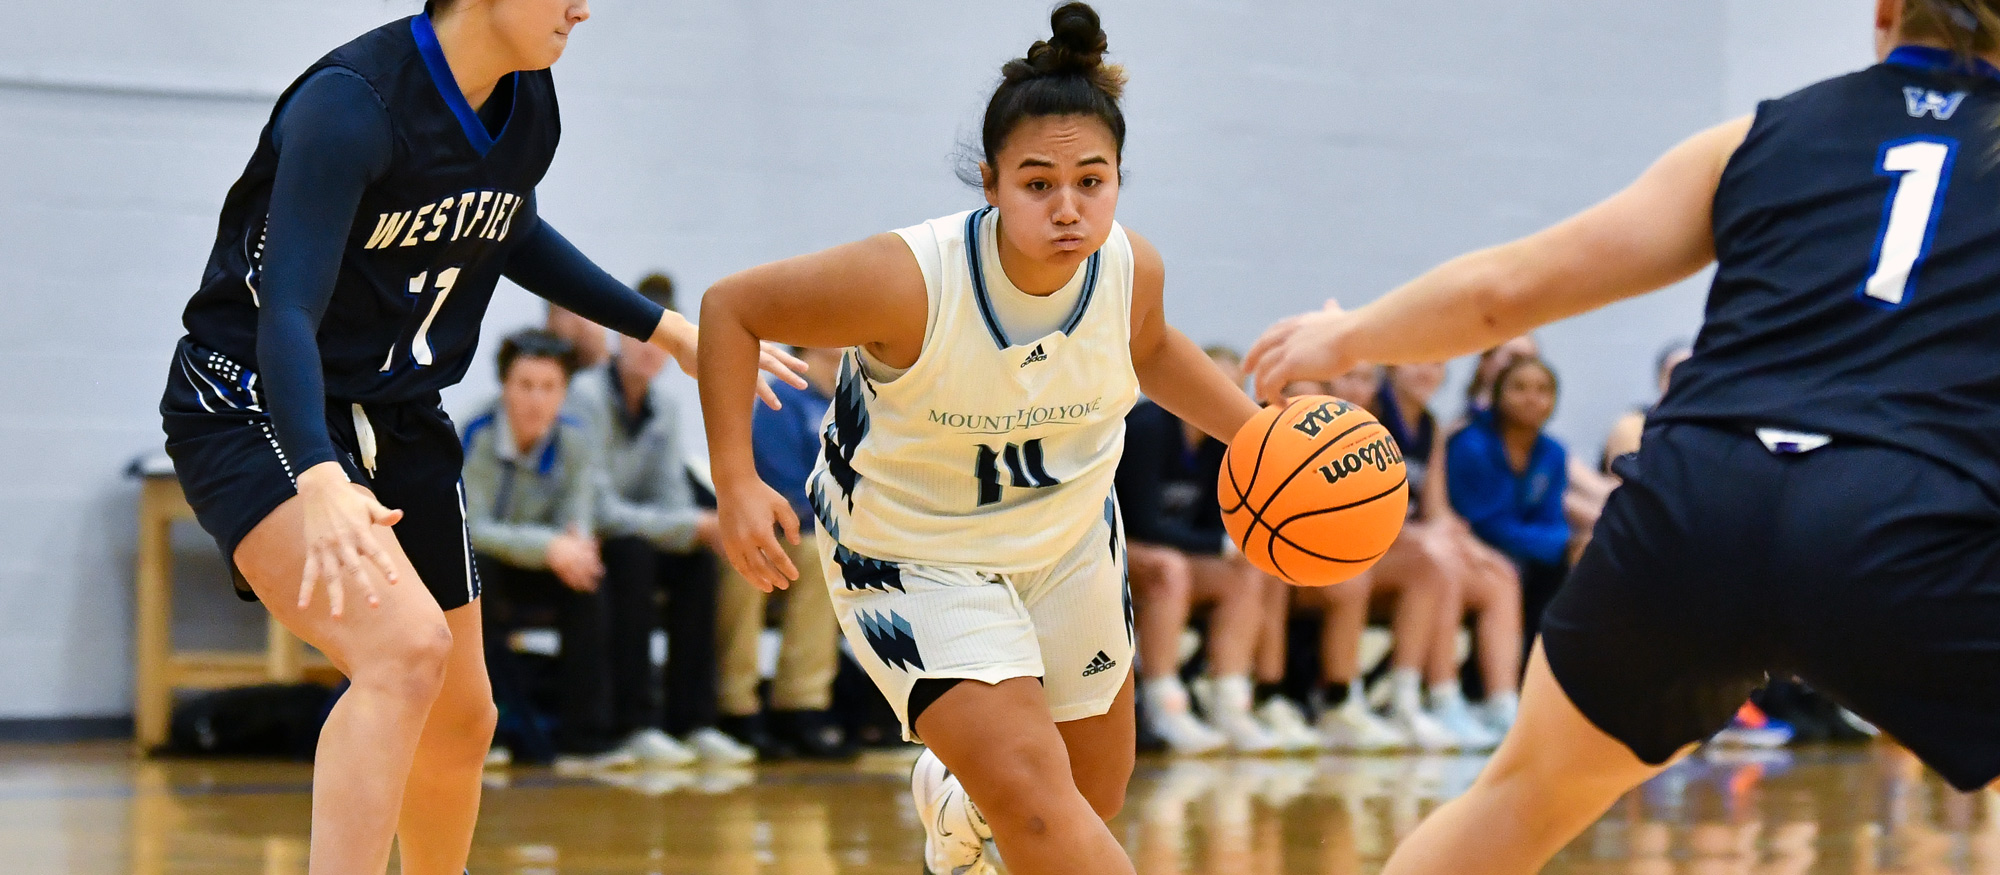 Marley Berano scored 14 points to lead Mount Holyoke against Dean on Nov. 11, 2023. (RJB Sports file photo)